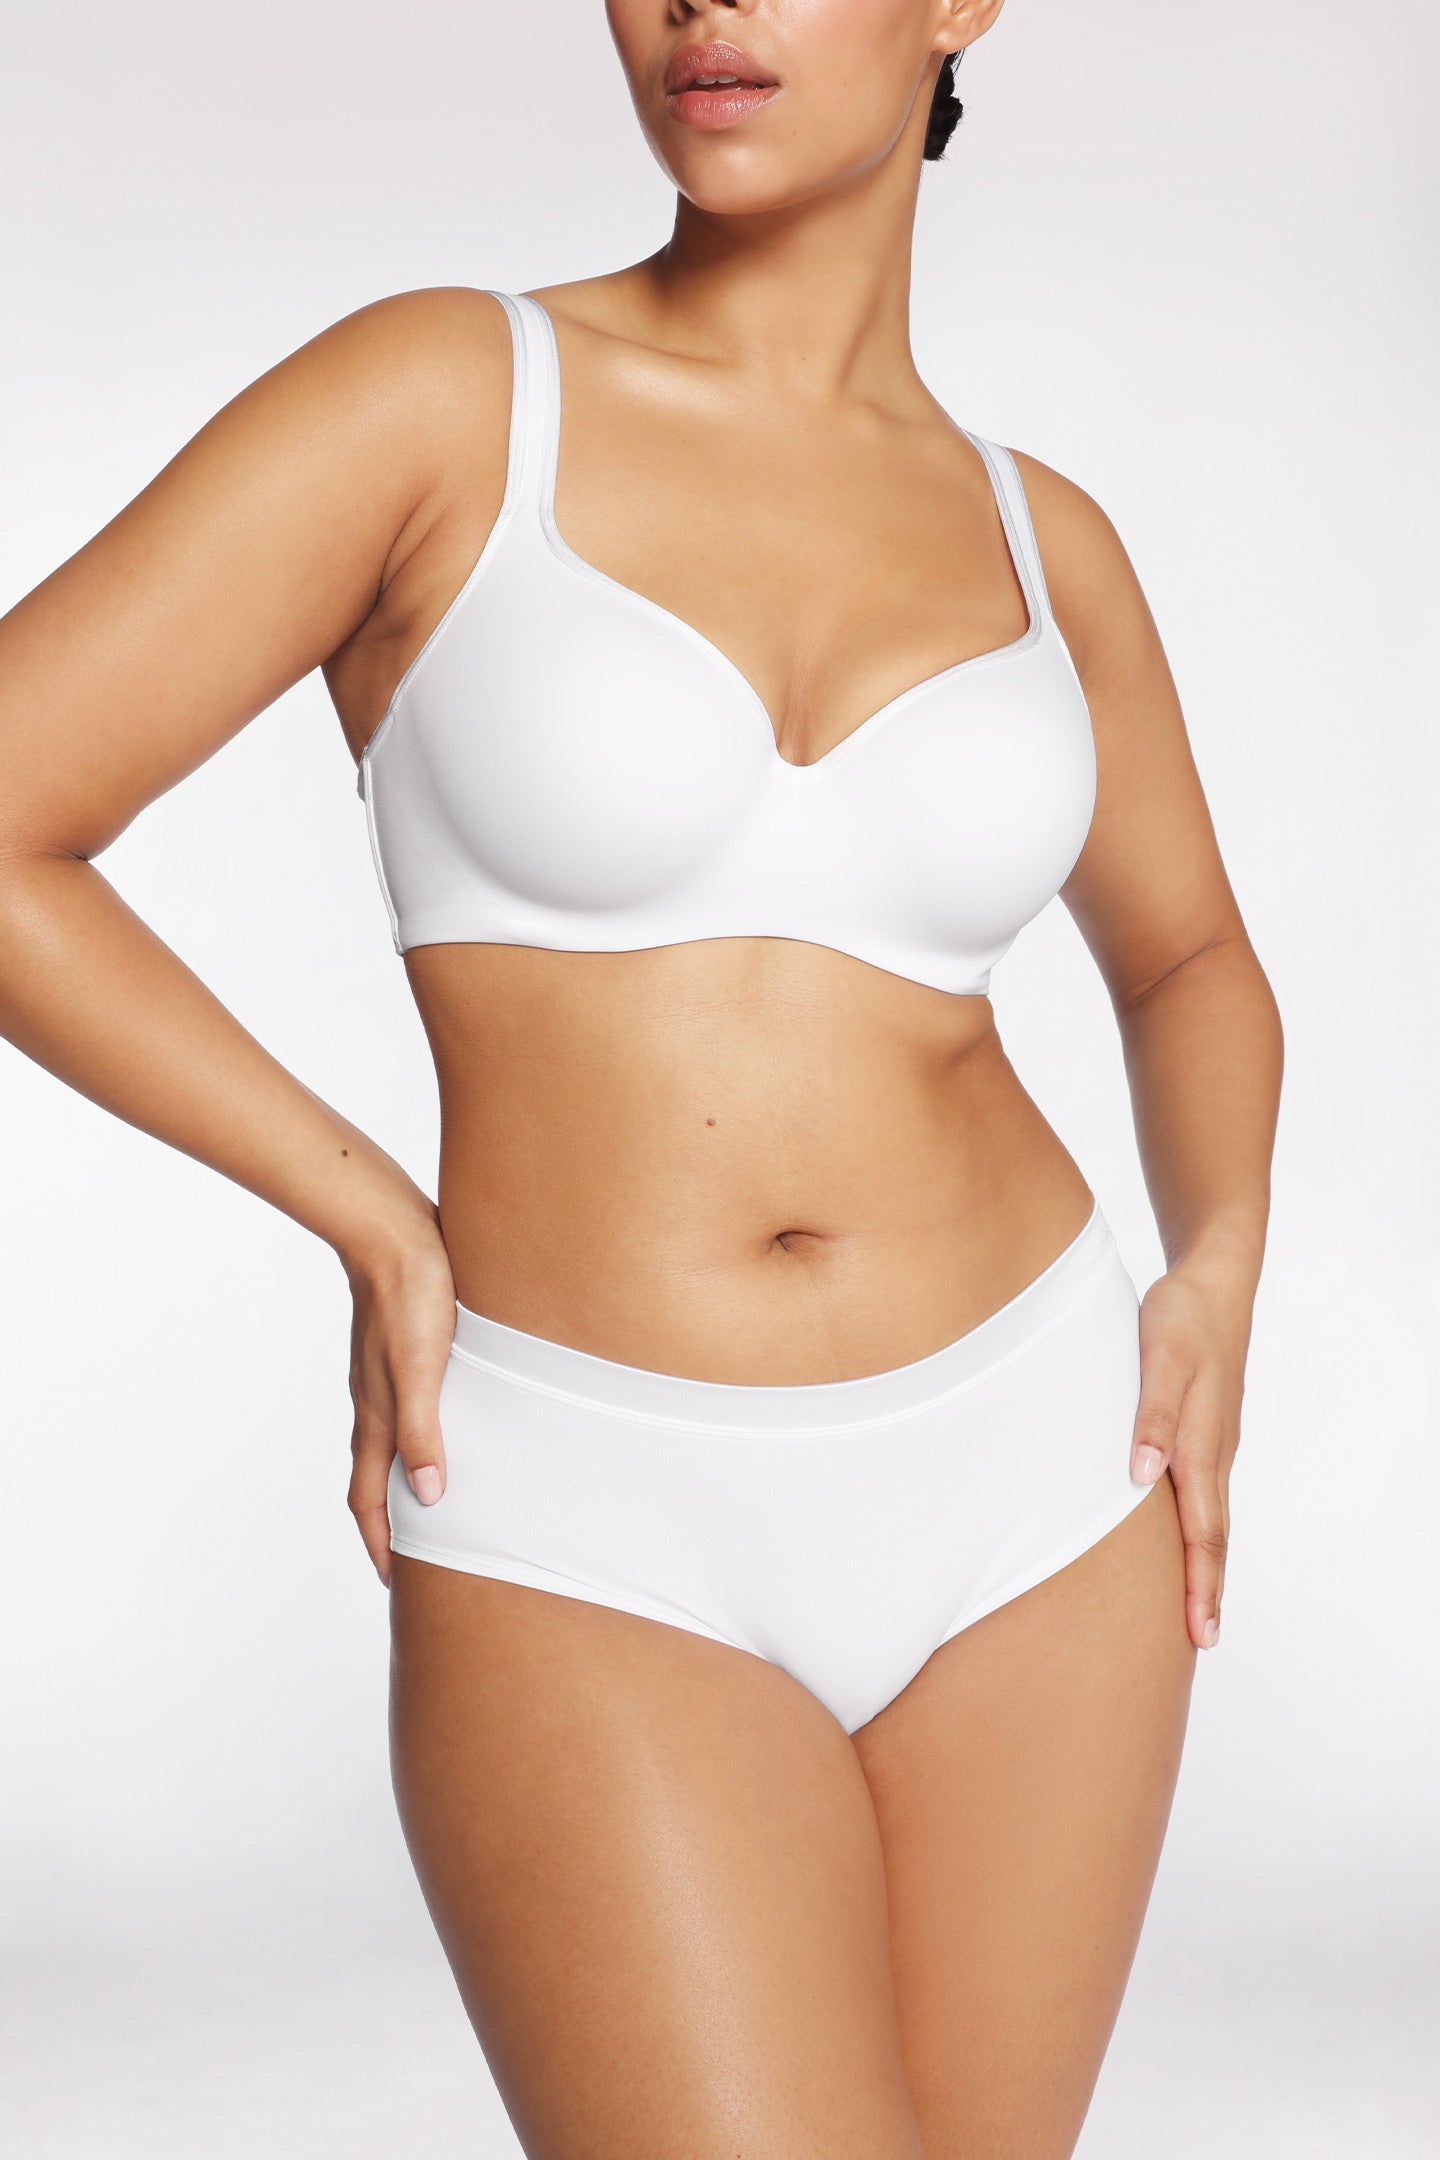 New* INTIMO White Everyday Miracle Contour Bra SIZE 42G 20G